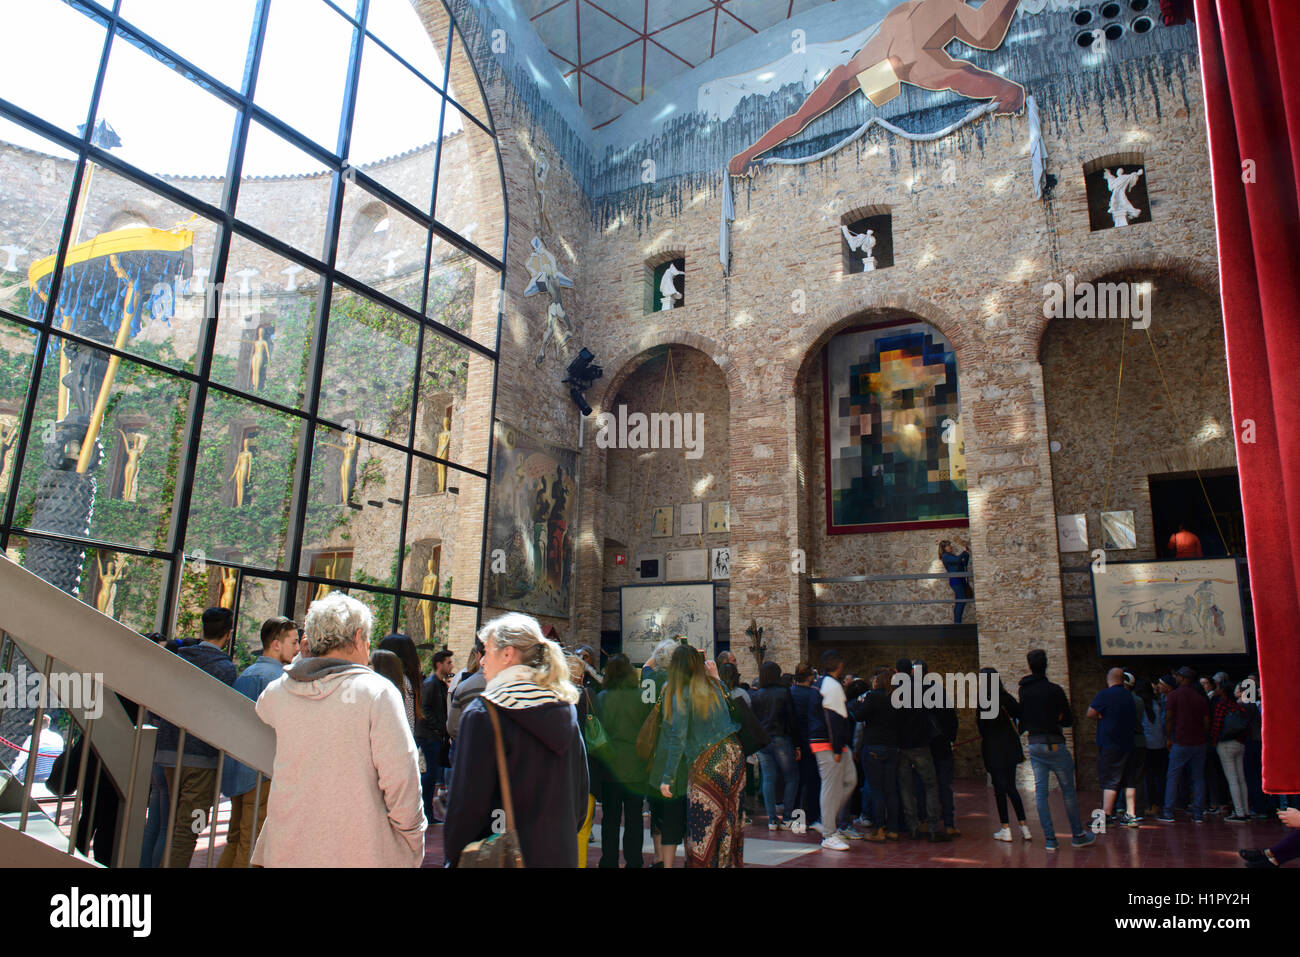 The Dali Museum in Figueres. Spain: Stock Photo